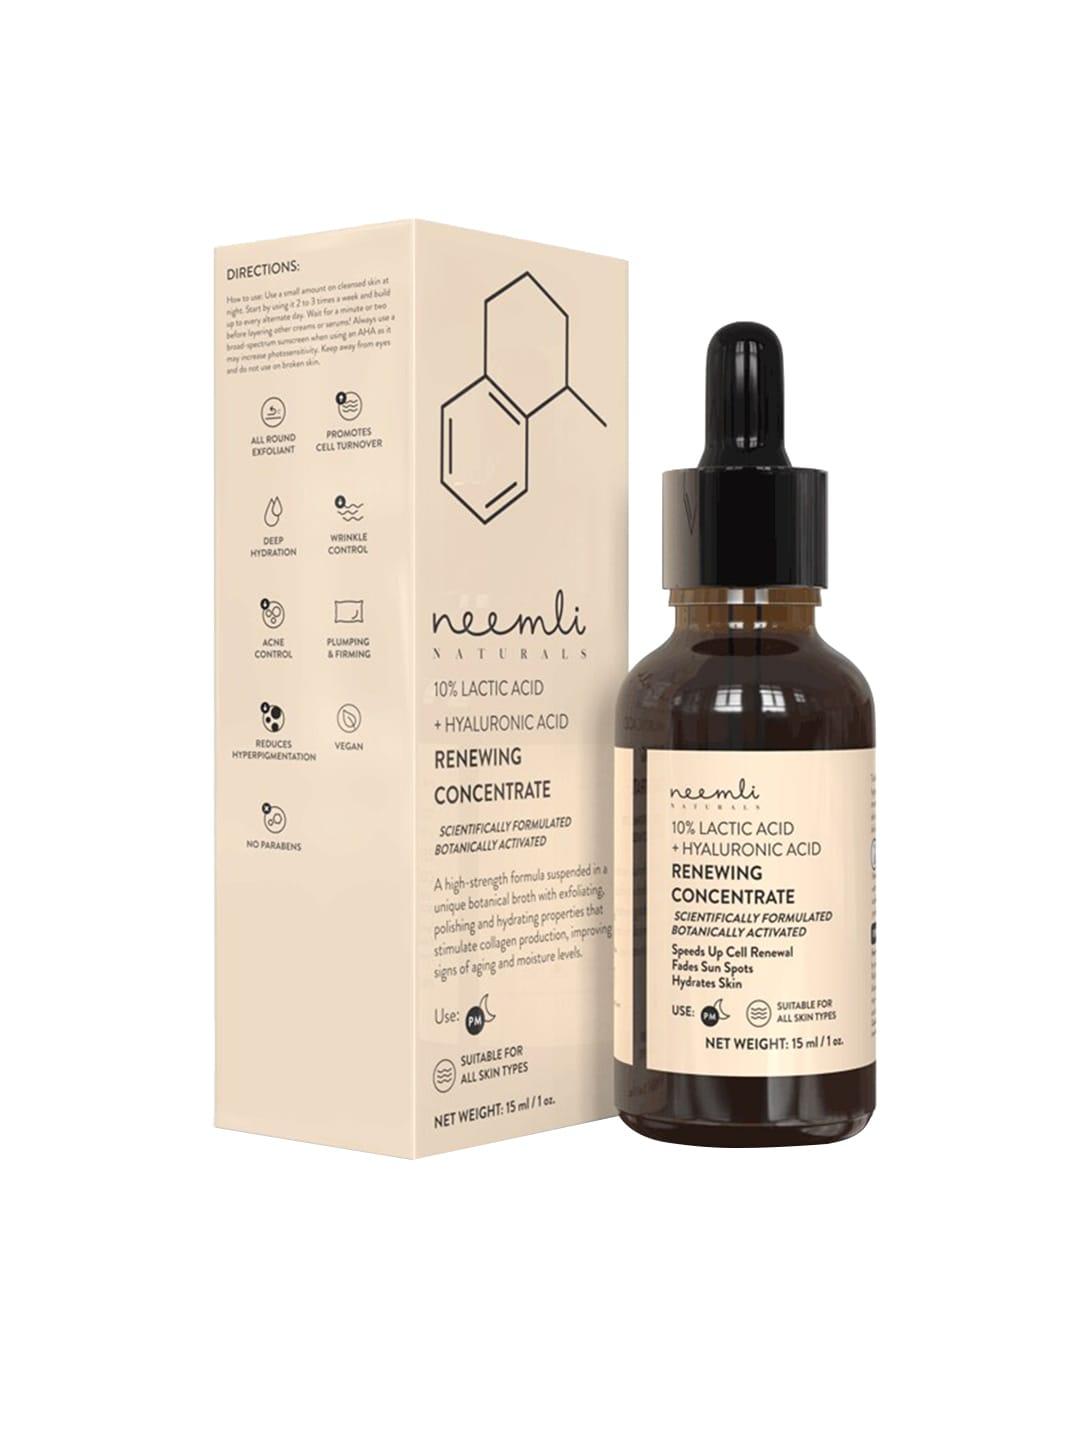 neemli naturals 10% lactic acid + hyaluronic acid renewing concentrate face serum - 15 ml